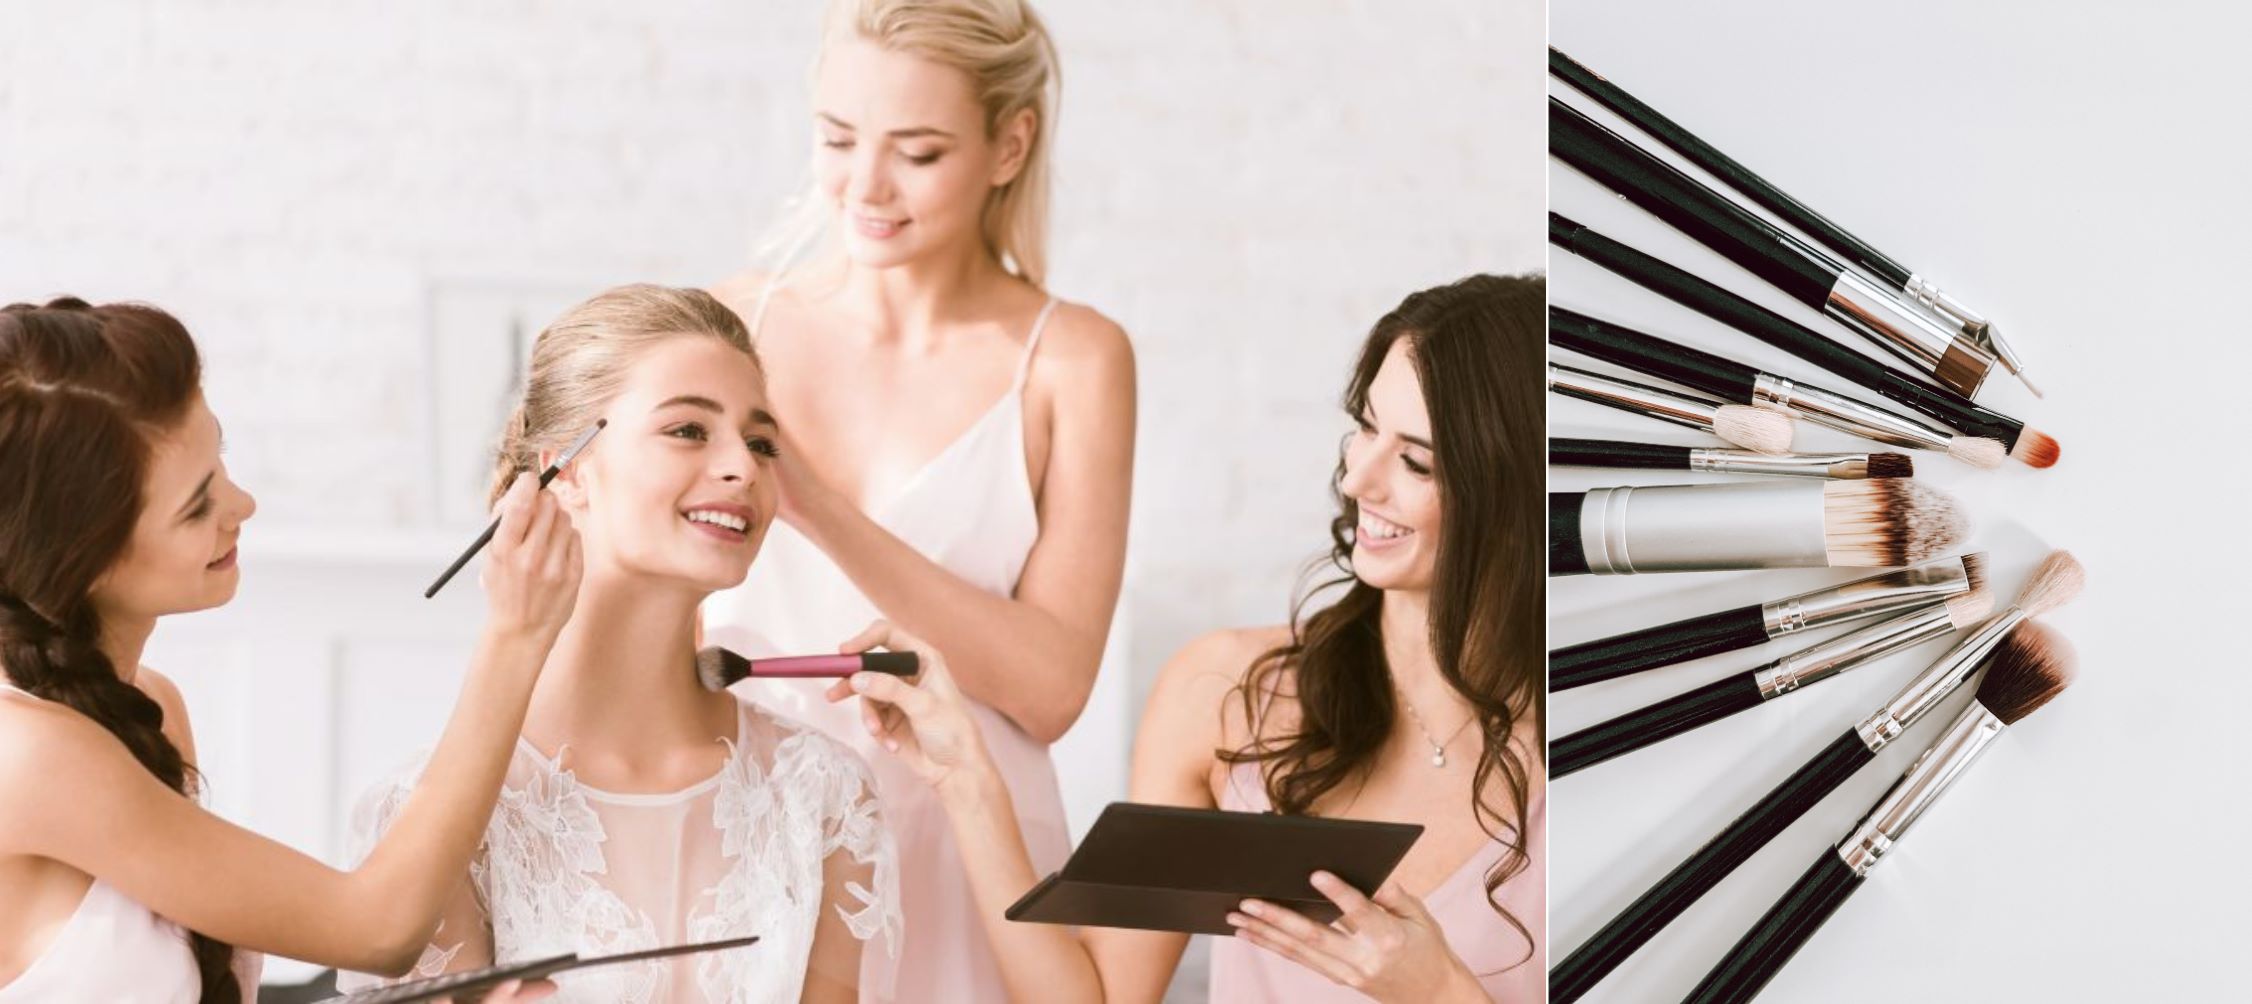 Bridal Beauty: How To Choose Your Wedding Day Glam